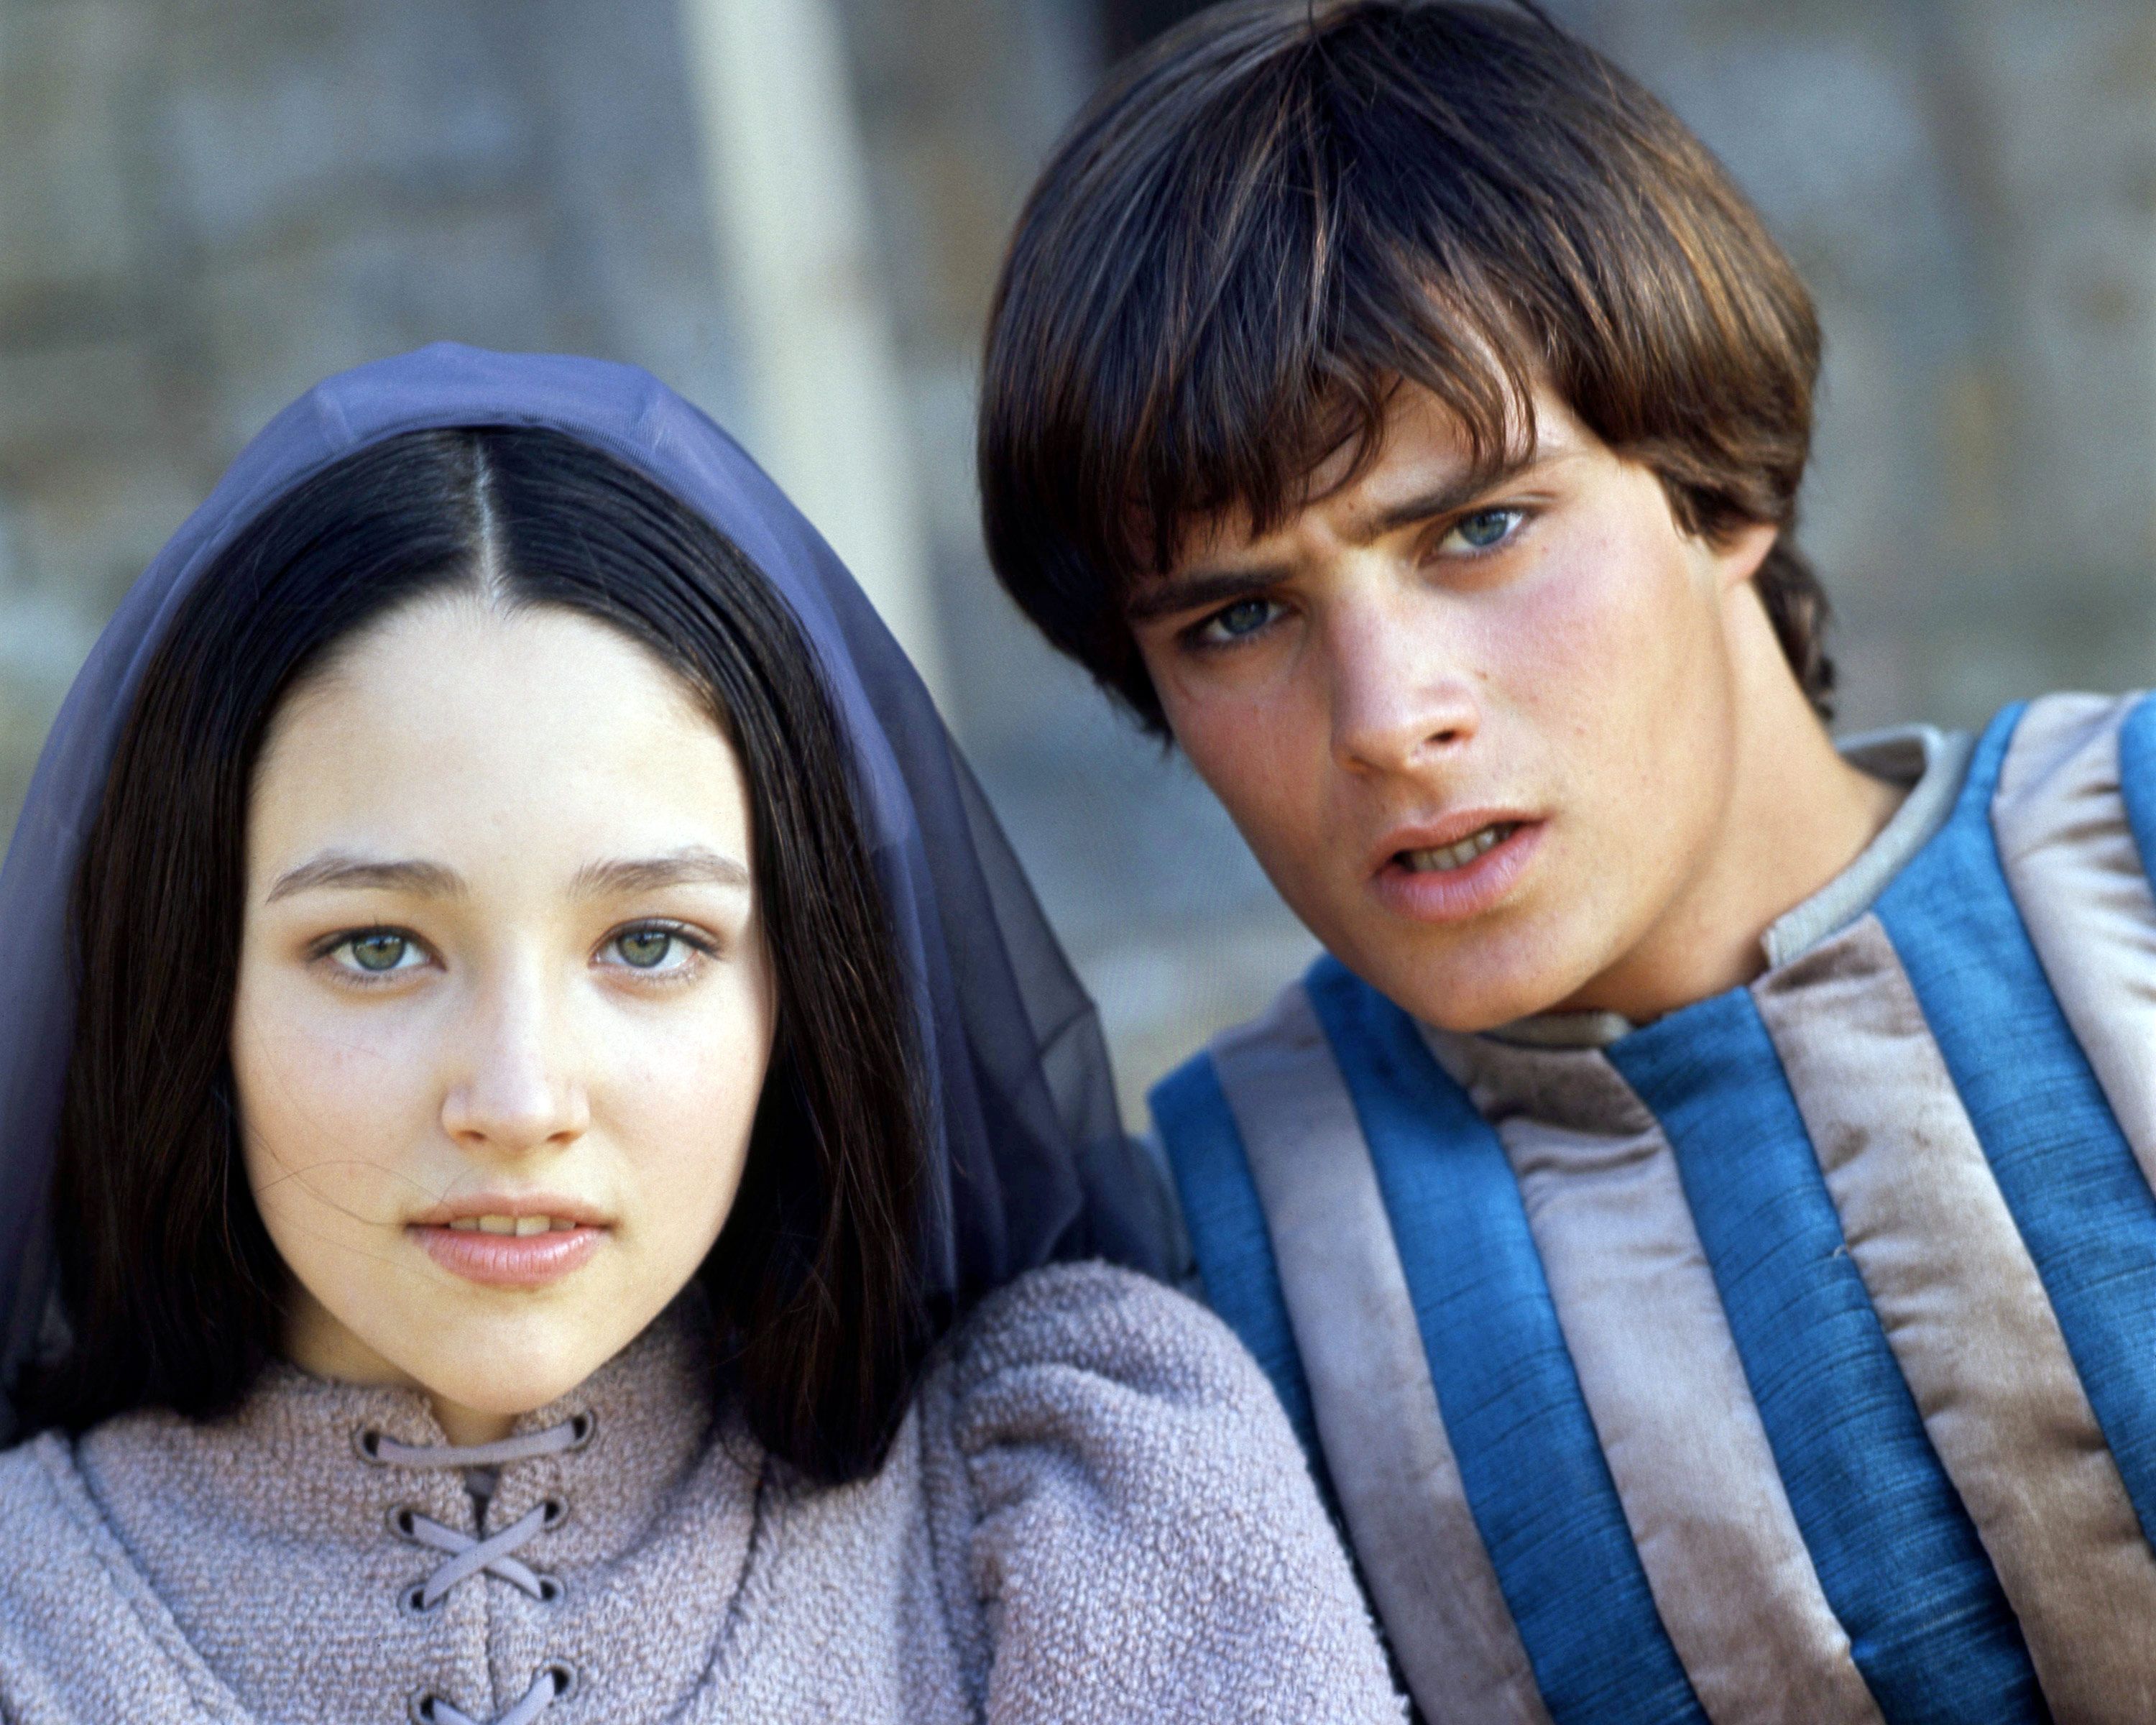 Romeo and Juliet Actors Sue Paramount for Child Abuse